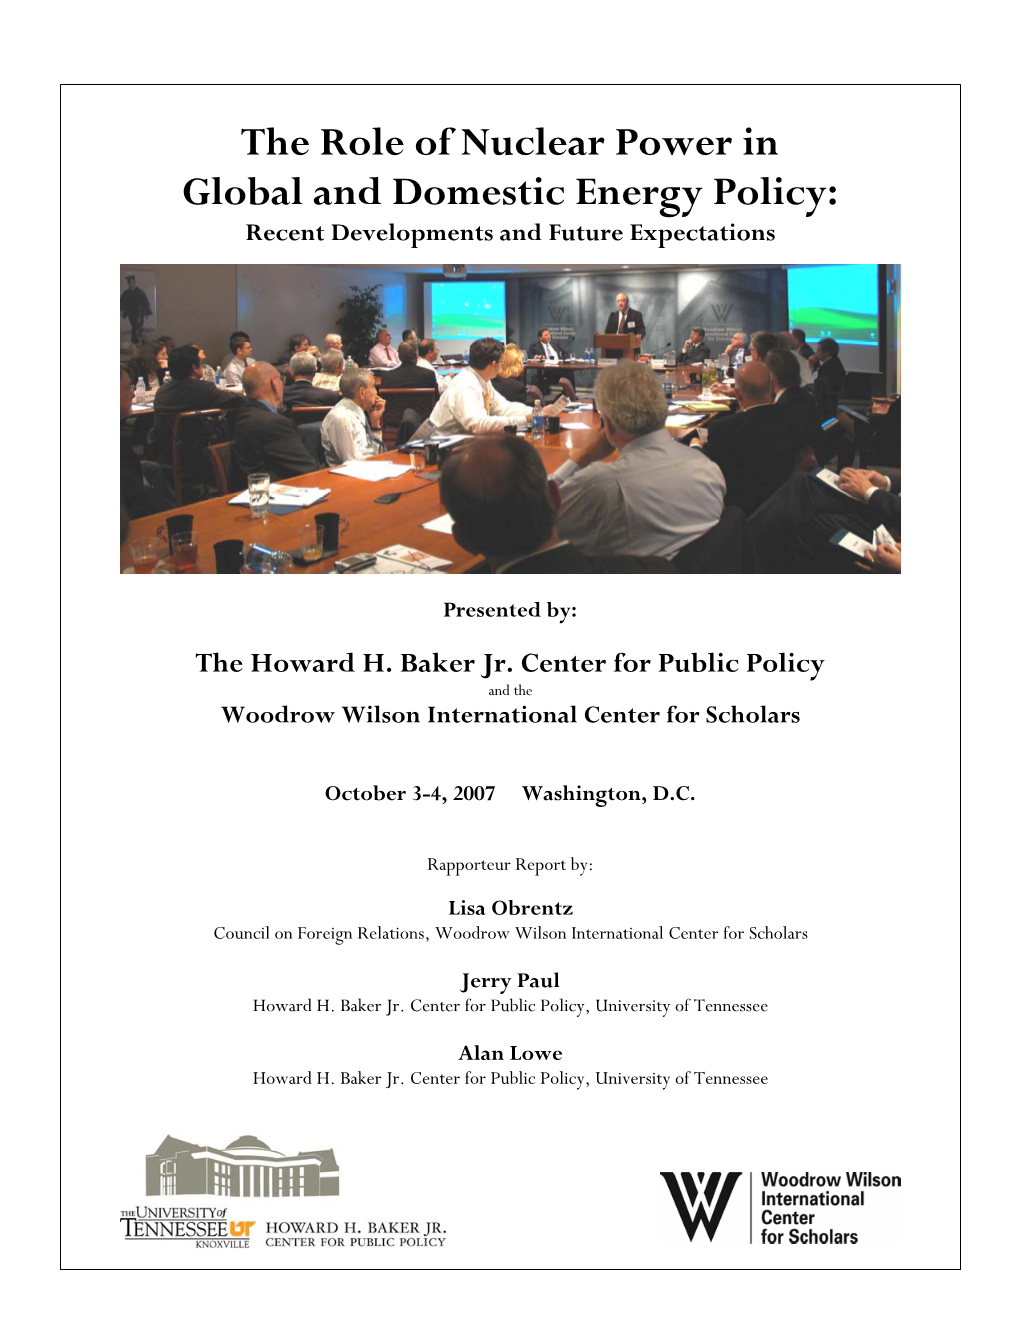 The Role of Nuclear Power in Global and Domestic Energy Policy: Recent Developments and Future Expectations